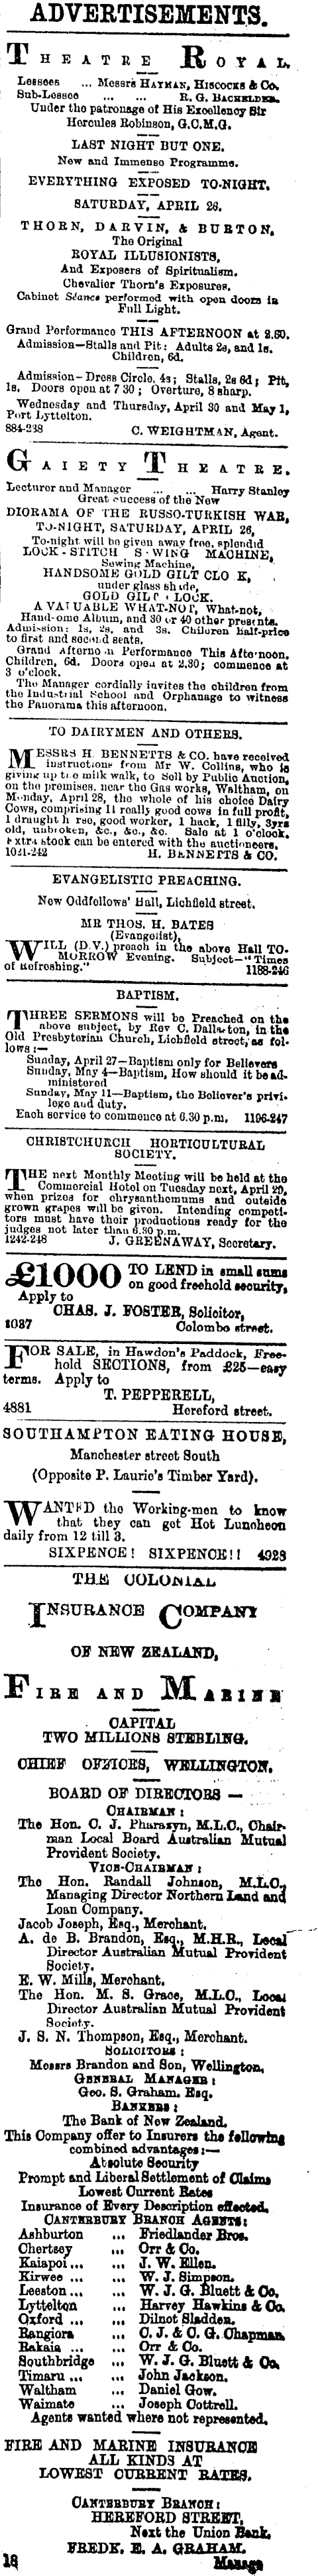 Papers Past Newspapers Star Christchurch 26 April 1879 Page 3 Advertisements Column 1